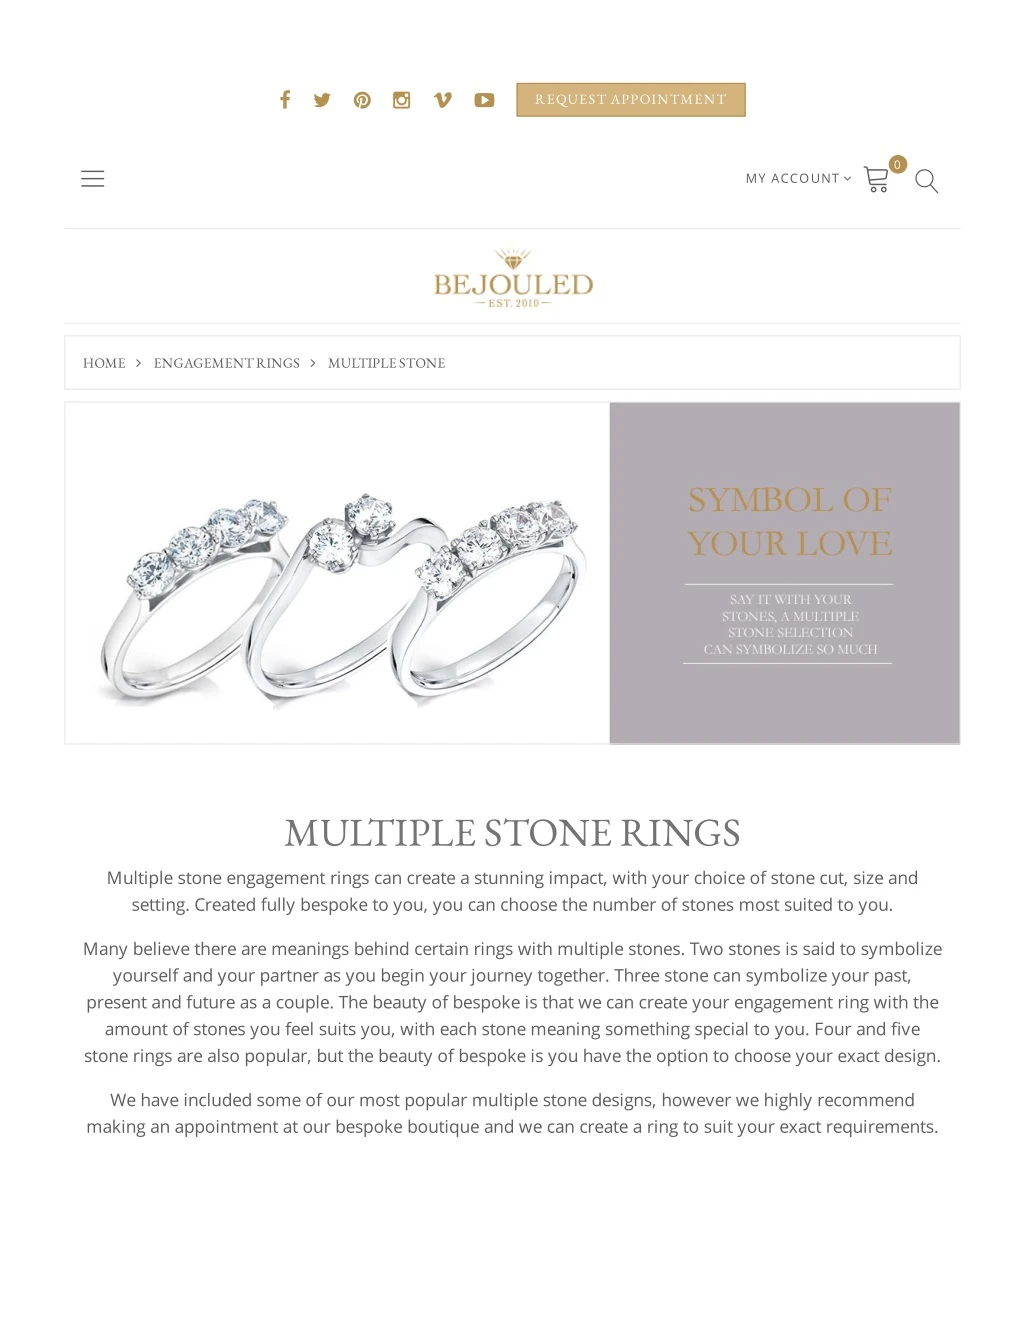 PPT - Multiple Stone Engagement Rings Glasgow | Bejouled PowerPoint ...